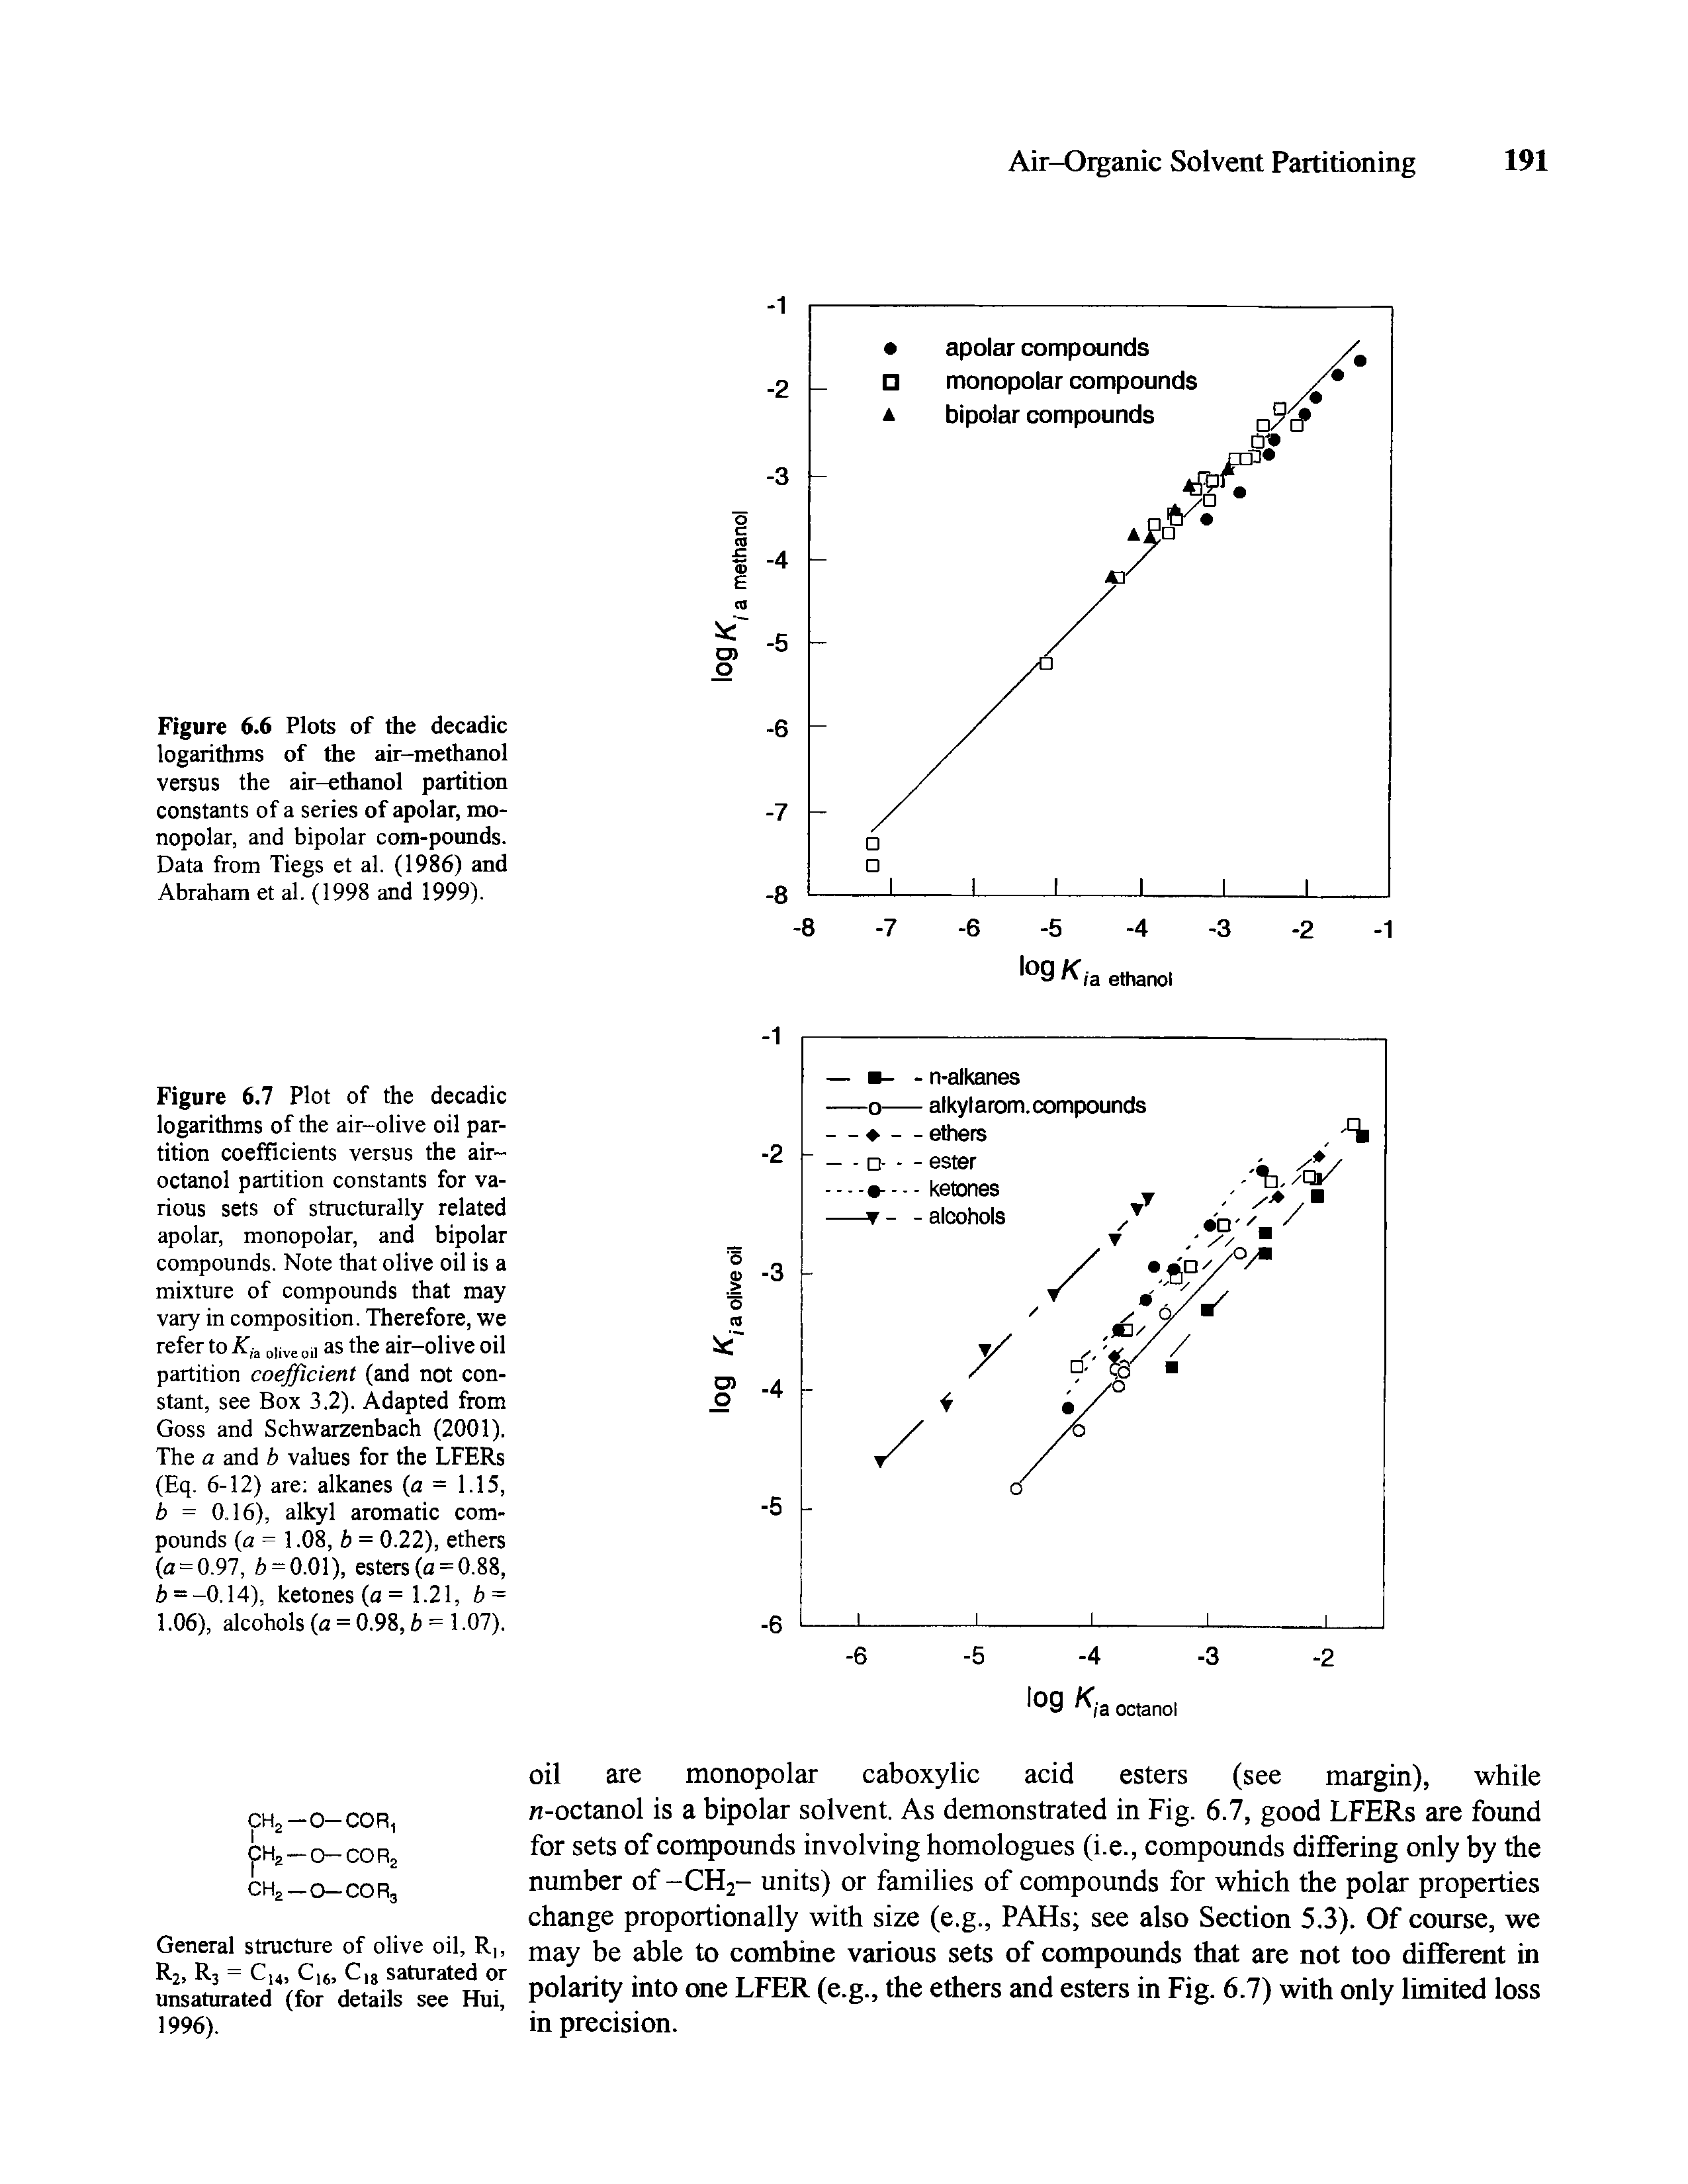 Figure 6.7 Plot of the decadic logarithms of the air-olive oil partition coefficients versus the air-octanol partition constants for various sets of structurally related apolar, monopolar, and bipolar compounds. Note that olive oil is a mixture of compounds that may vary in composition. Therefore, we refer to A" a oUve oi] as the air-olive oil partition coefficient (and not constant, see Box 3.2). Adapted from Goss and Schwarzenbach (2001). The a and b values for the LFERs (Eq. 6-12) are alkanes (a - 1.15, b = 0.16), alkyl aromatic compounds (a = 1.08, b = 0.22), ethers (a = 0.97, 6 = 0.01), esters (a = 0.88, b = -0,14), ketones (a = 1.21, b = 1.06), alcohols (a = 0.98, b = 1.07).